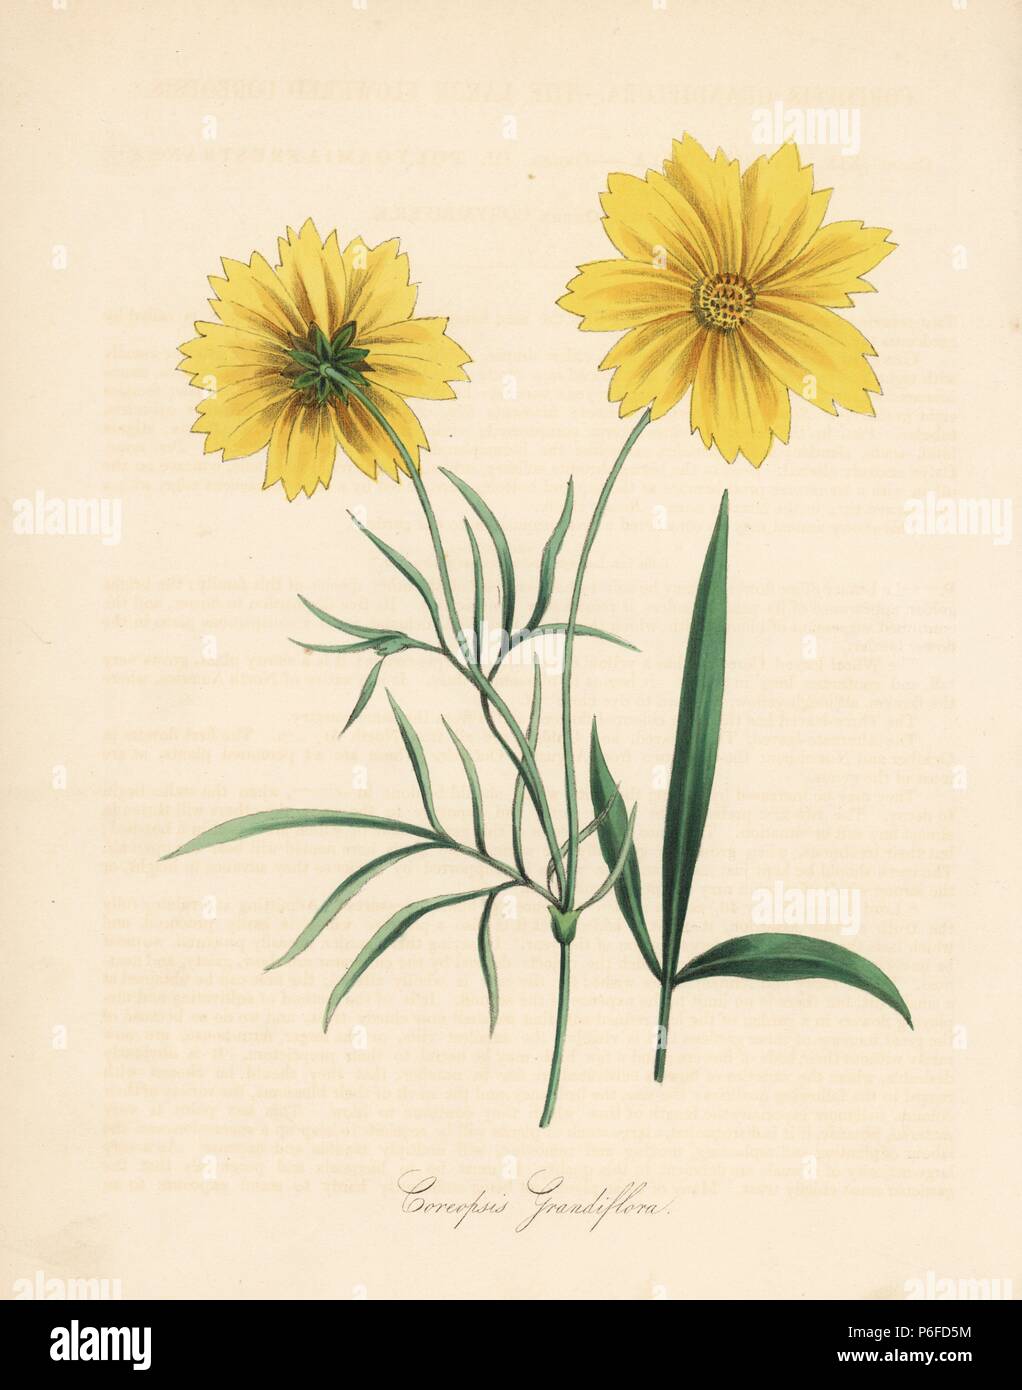 Large-flowered coreopsis, Coreopsis grandiflora. Handcoloured zincograph by C. Chabot drawn by Miss M. A. Burnett from her 'Plantae Utiliores: or Illustrations of Useful Plants,' Whittaker, London, 1842. Miss Burnett drew the botanical illustrations, but the text was chiefly by her late brother, British botanist Gilbert Thomas Burnett (1800-1835). Stock Photo